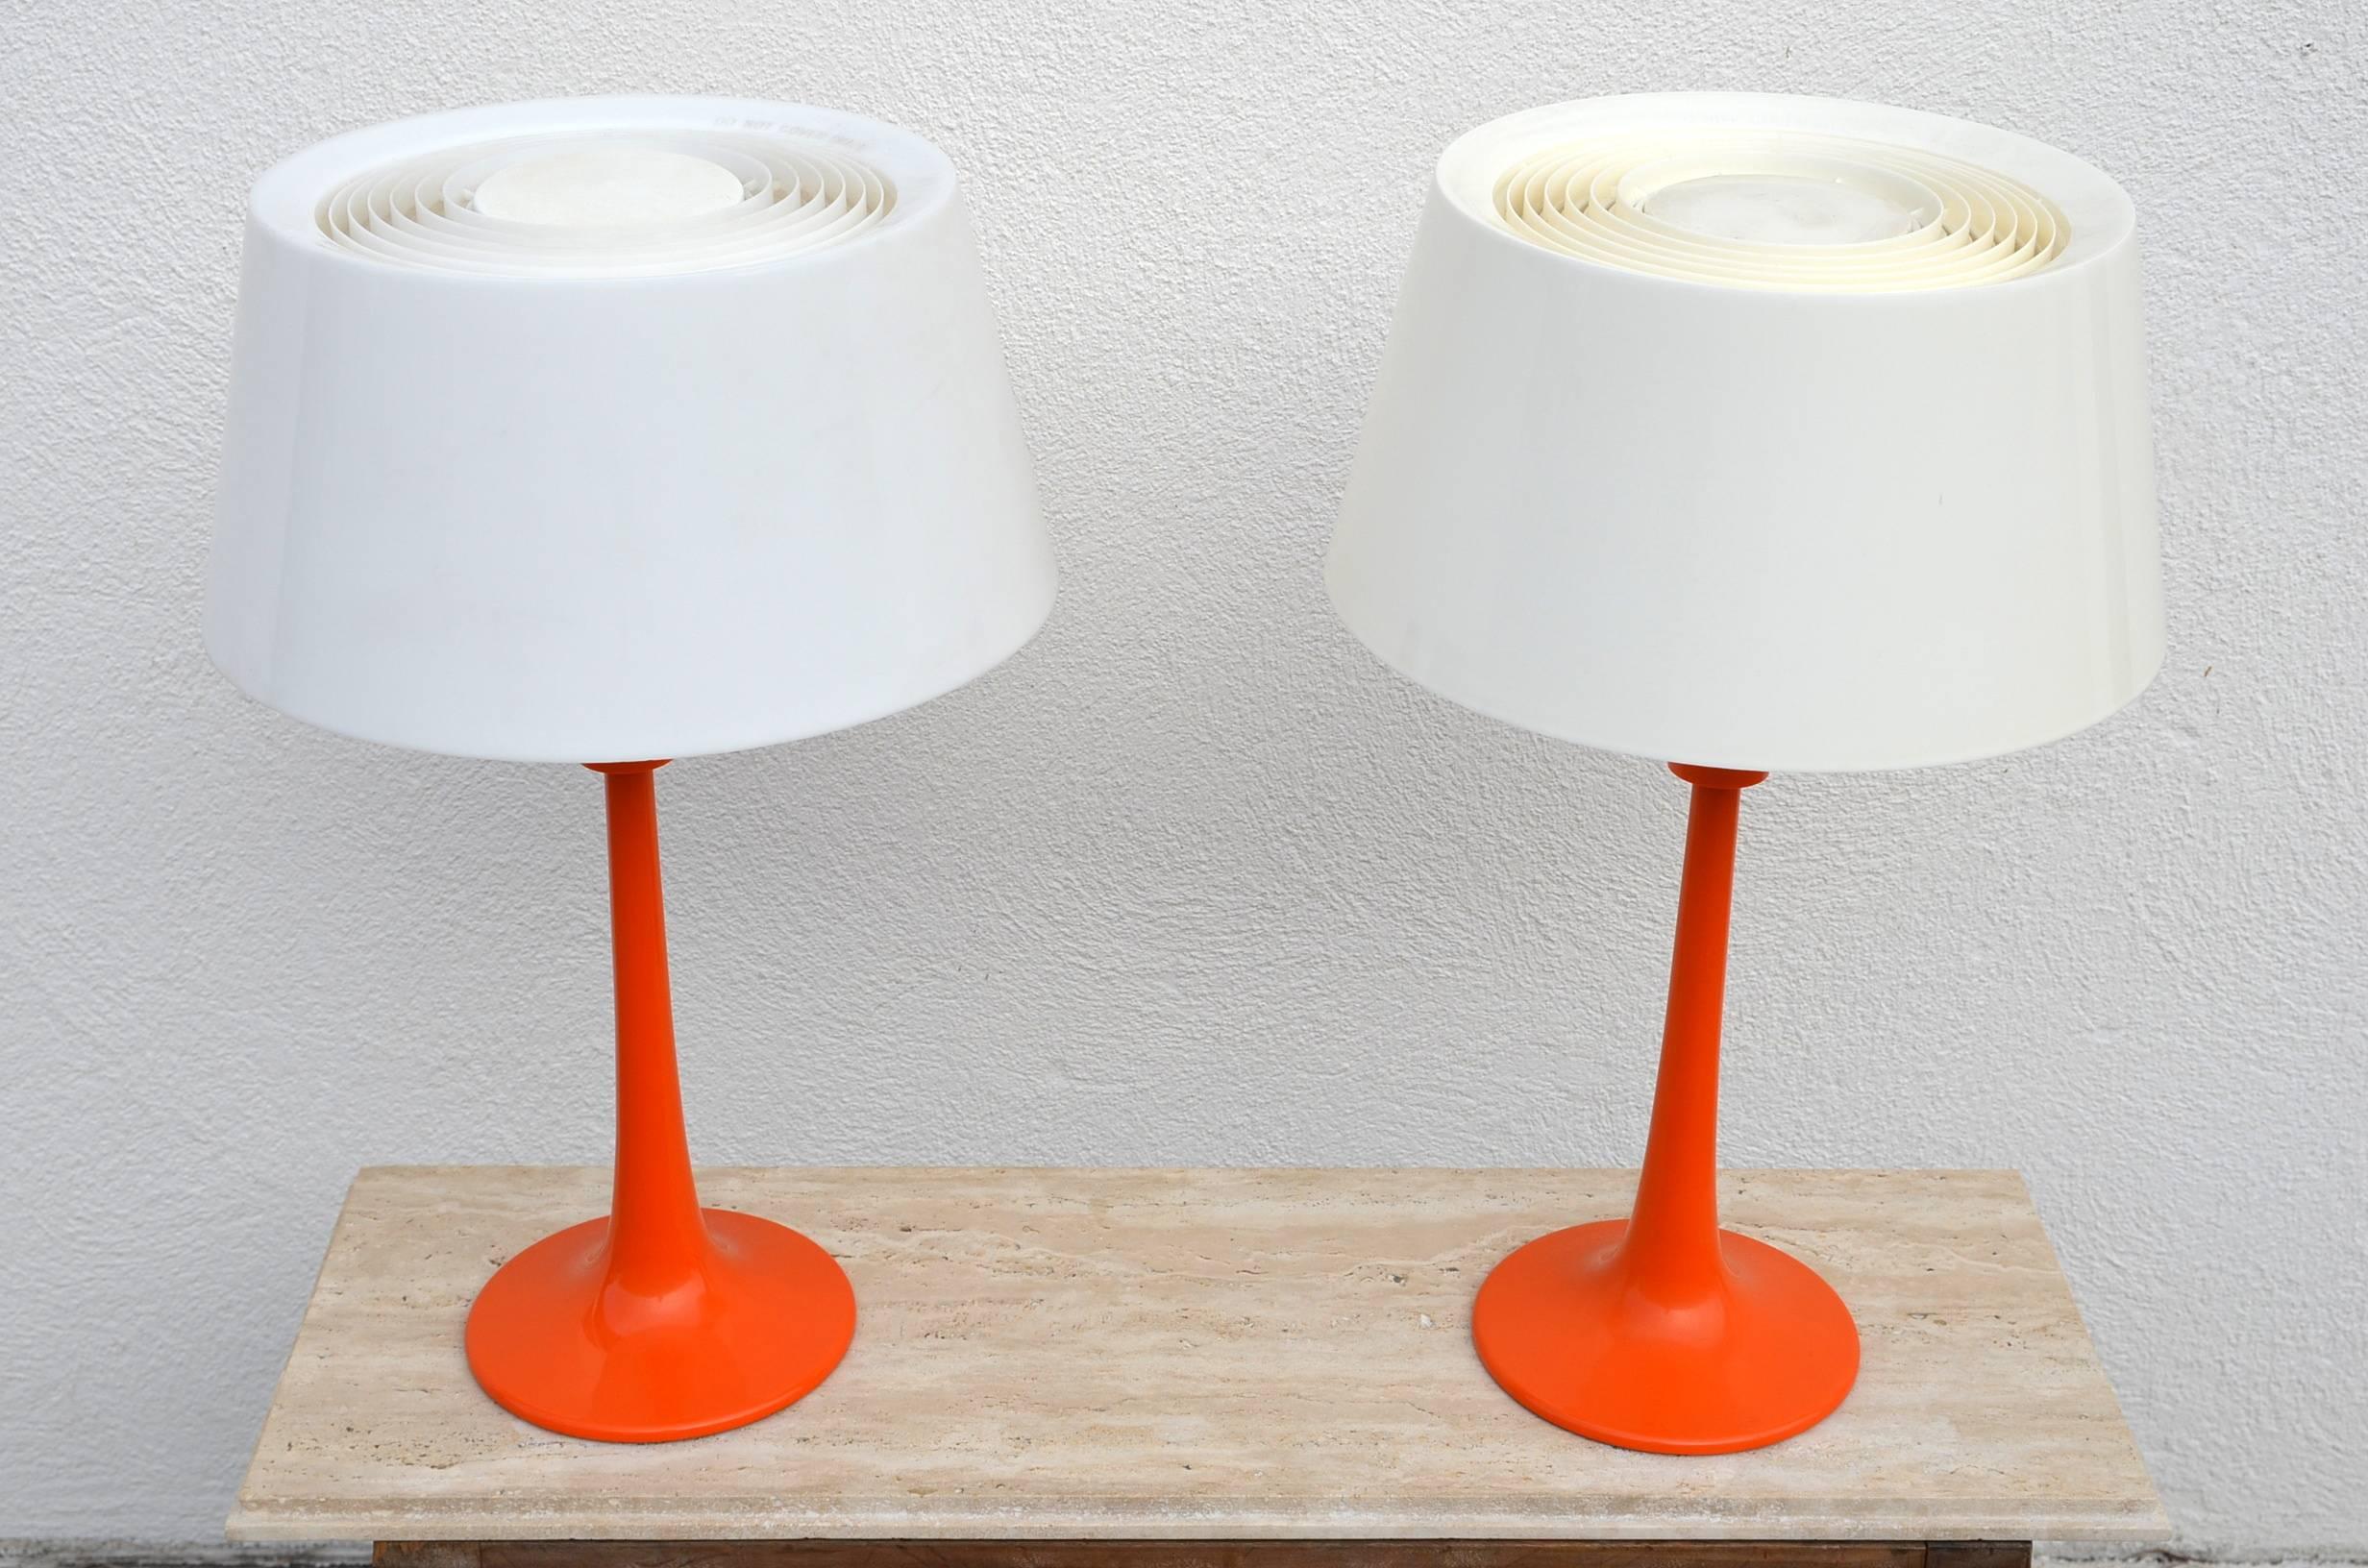 Pair of pristine vintage Lumilon table lamps by Gerald Thurston for Lightolier. Original one-piece shade-diffusers. UL listed. 